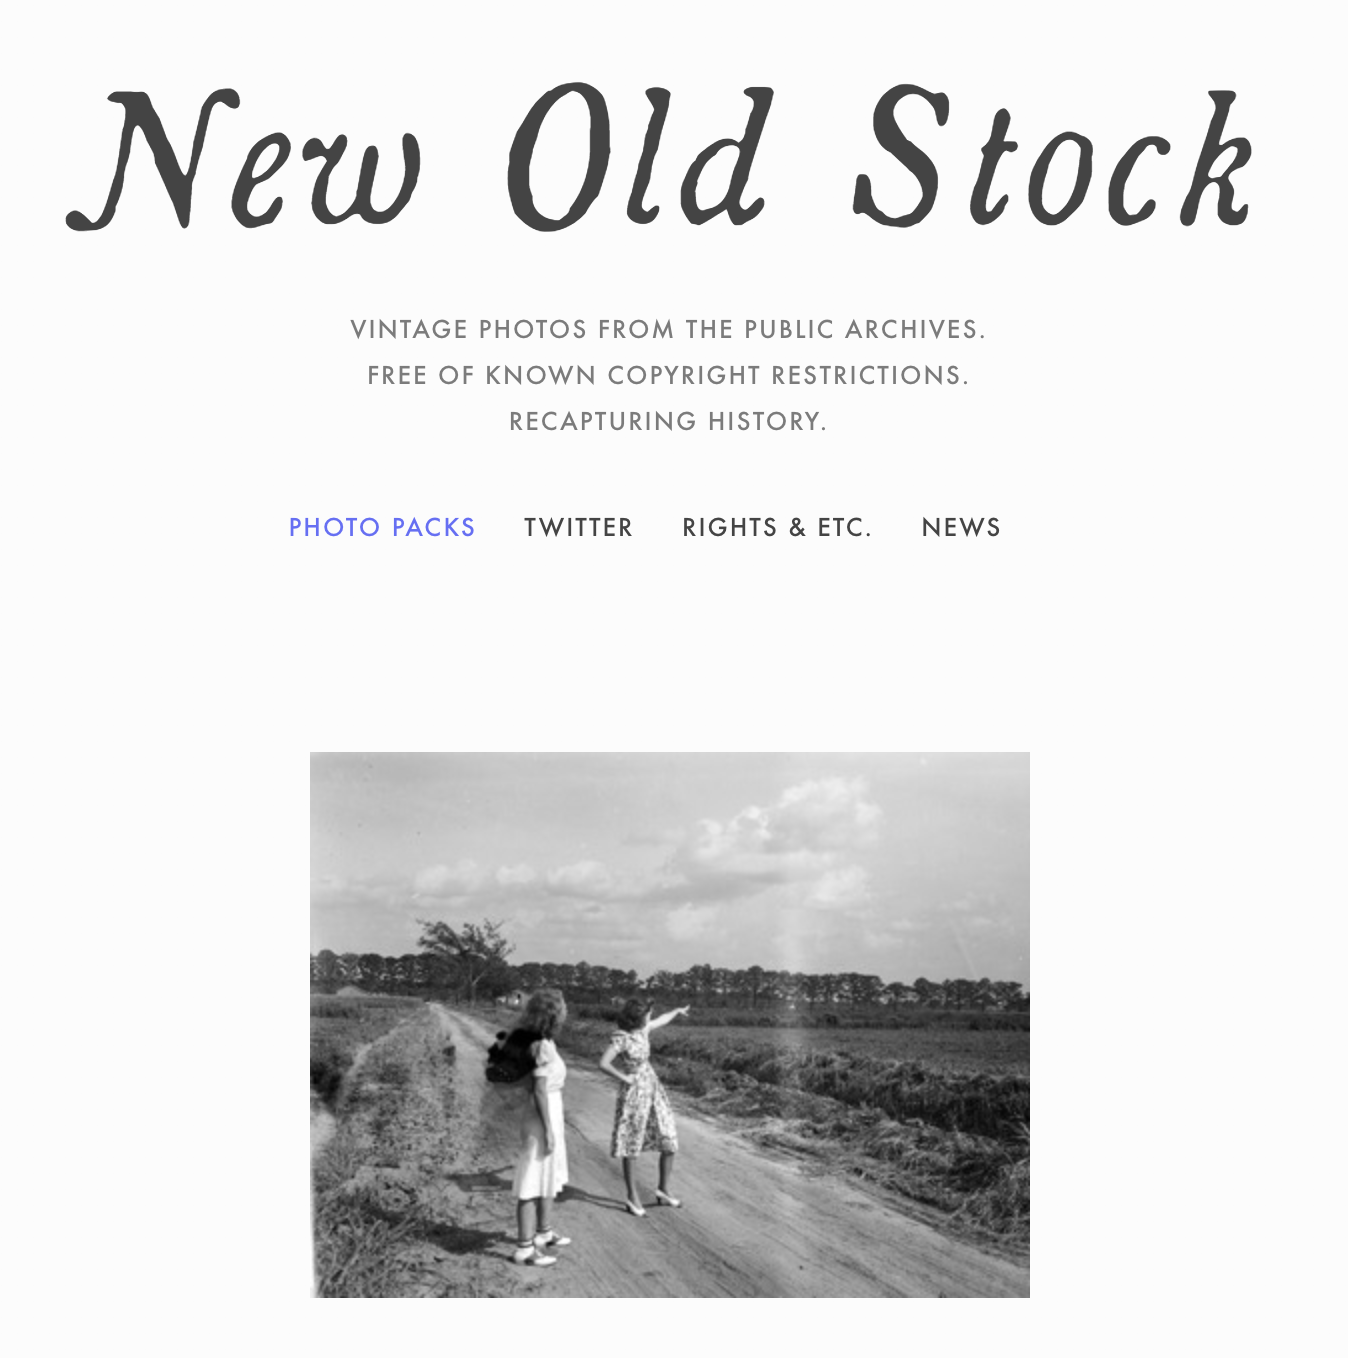 New Old Stock, our pick for the best free stock photos site for vintage photos